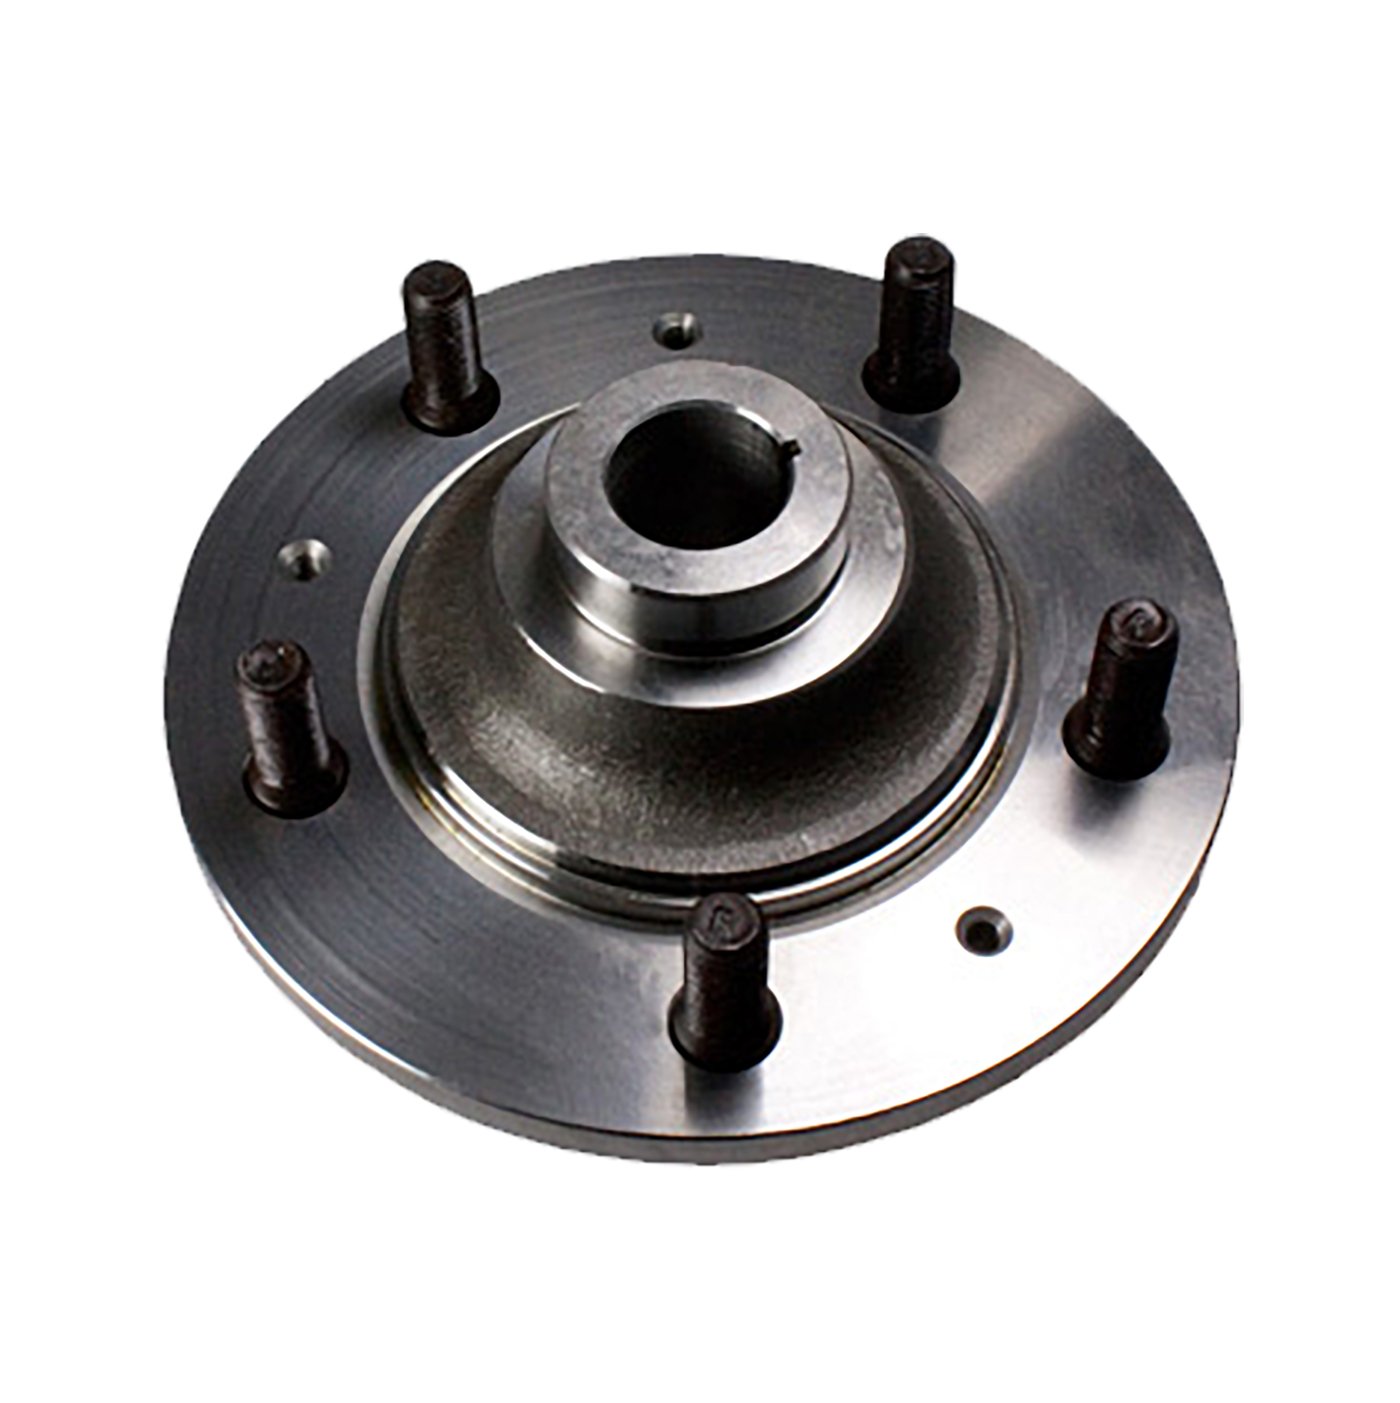 Two Piece Axle Hub For Model 20. Fits